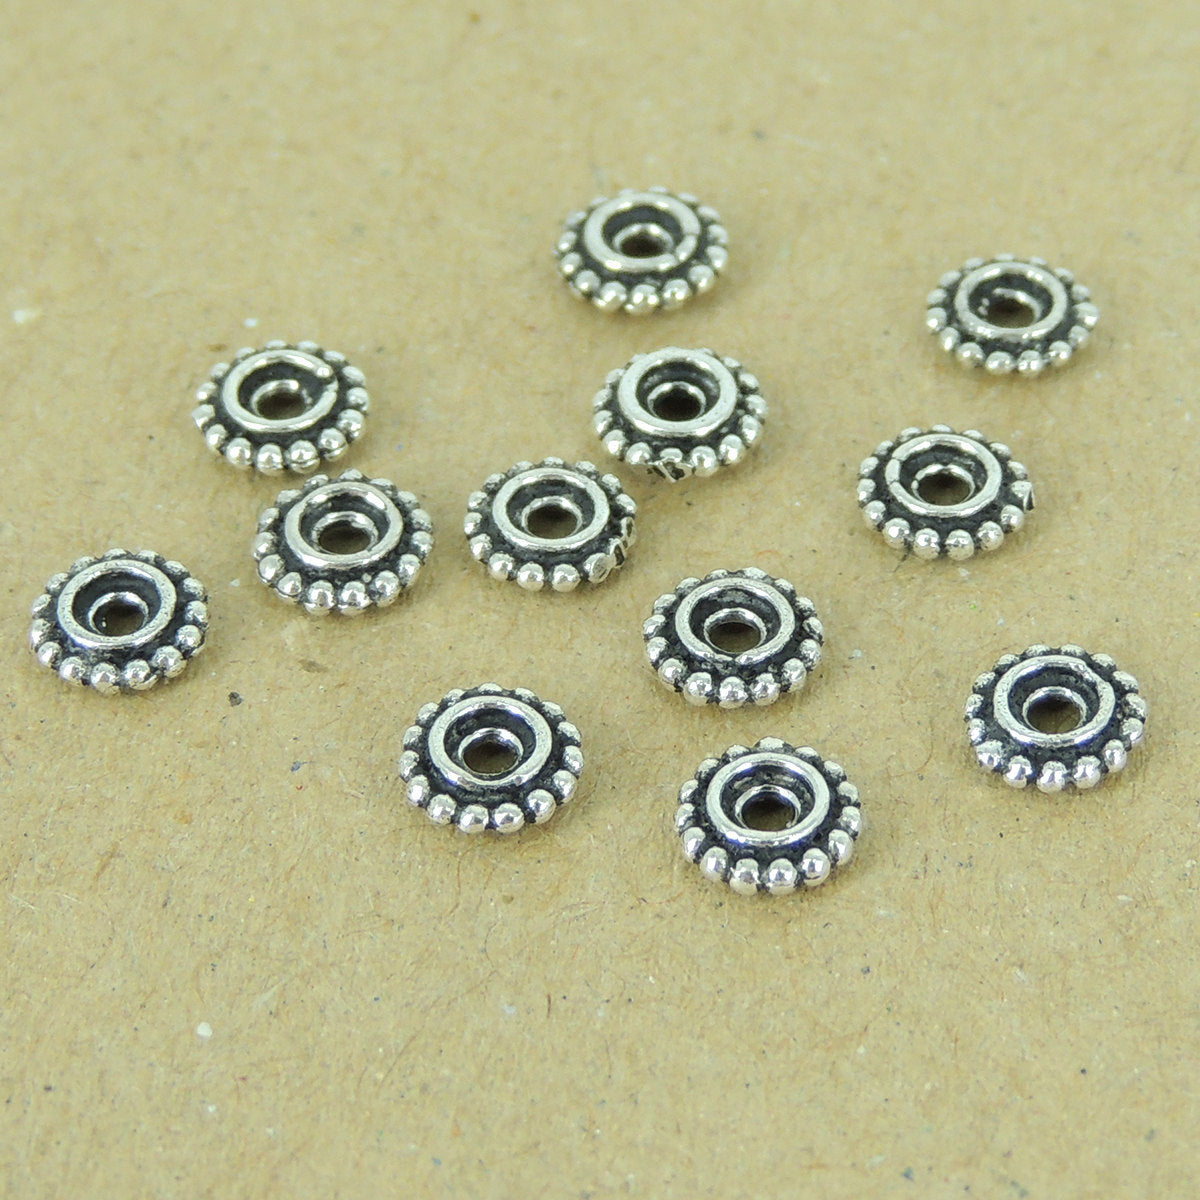 12 PCS Vintage Flower Spacer Beads - S925 Sterling Silver